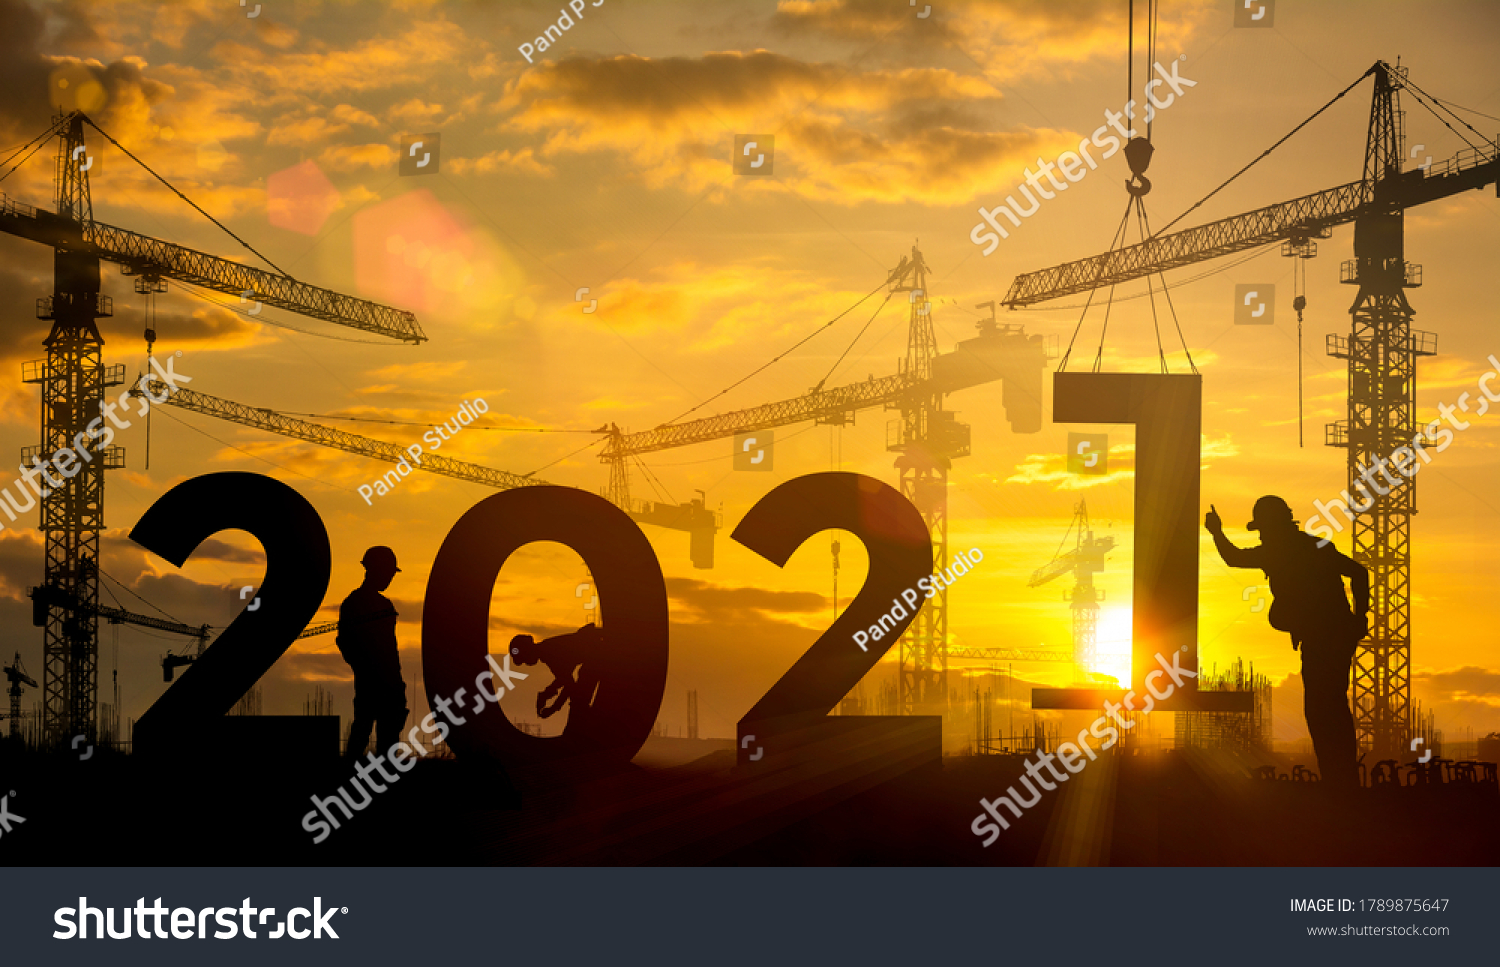 Silhouette construction site,Cranes building construction 2021 year sign #1789875647